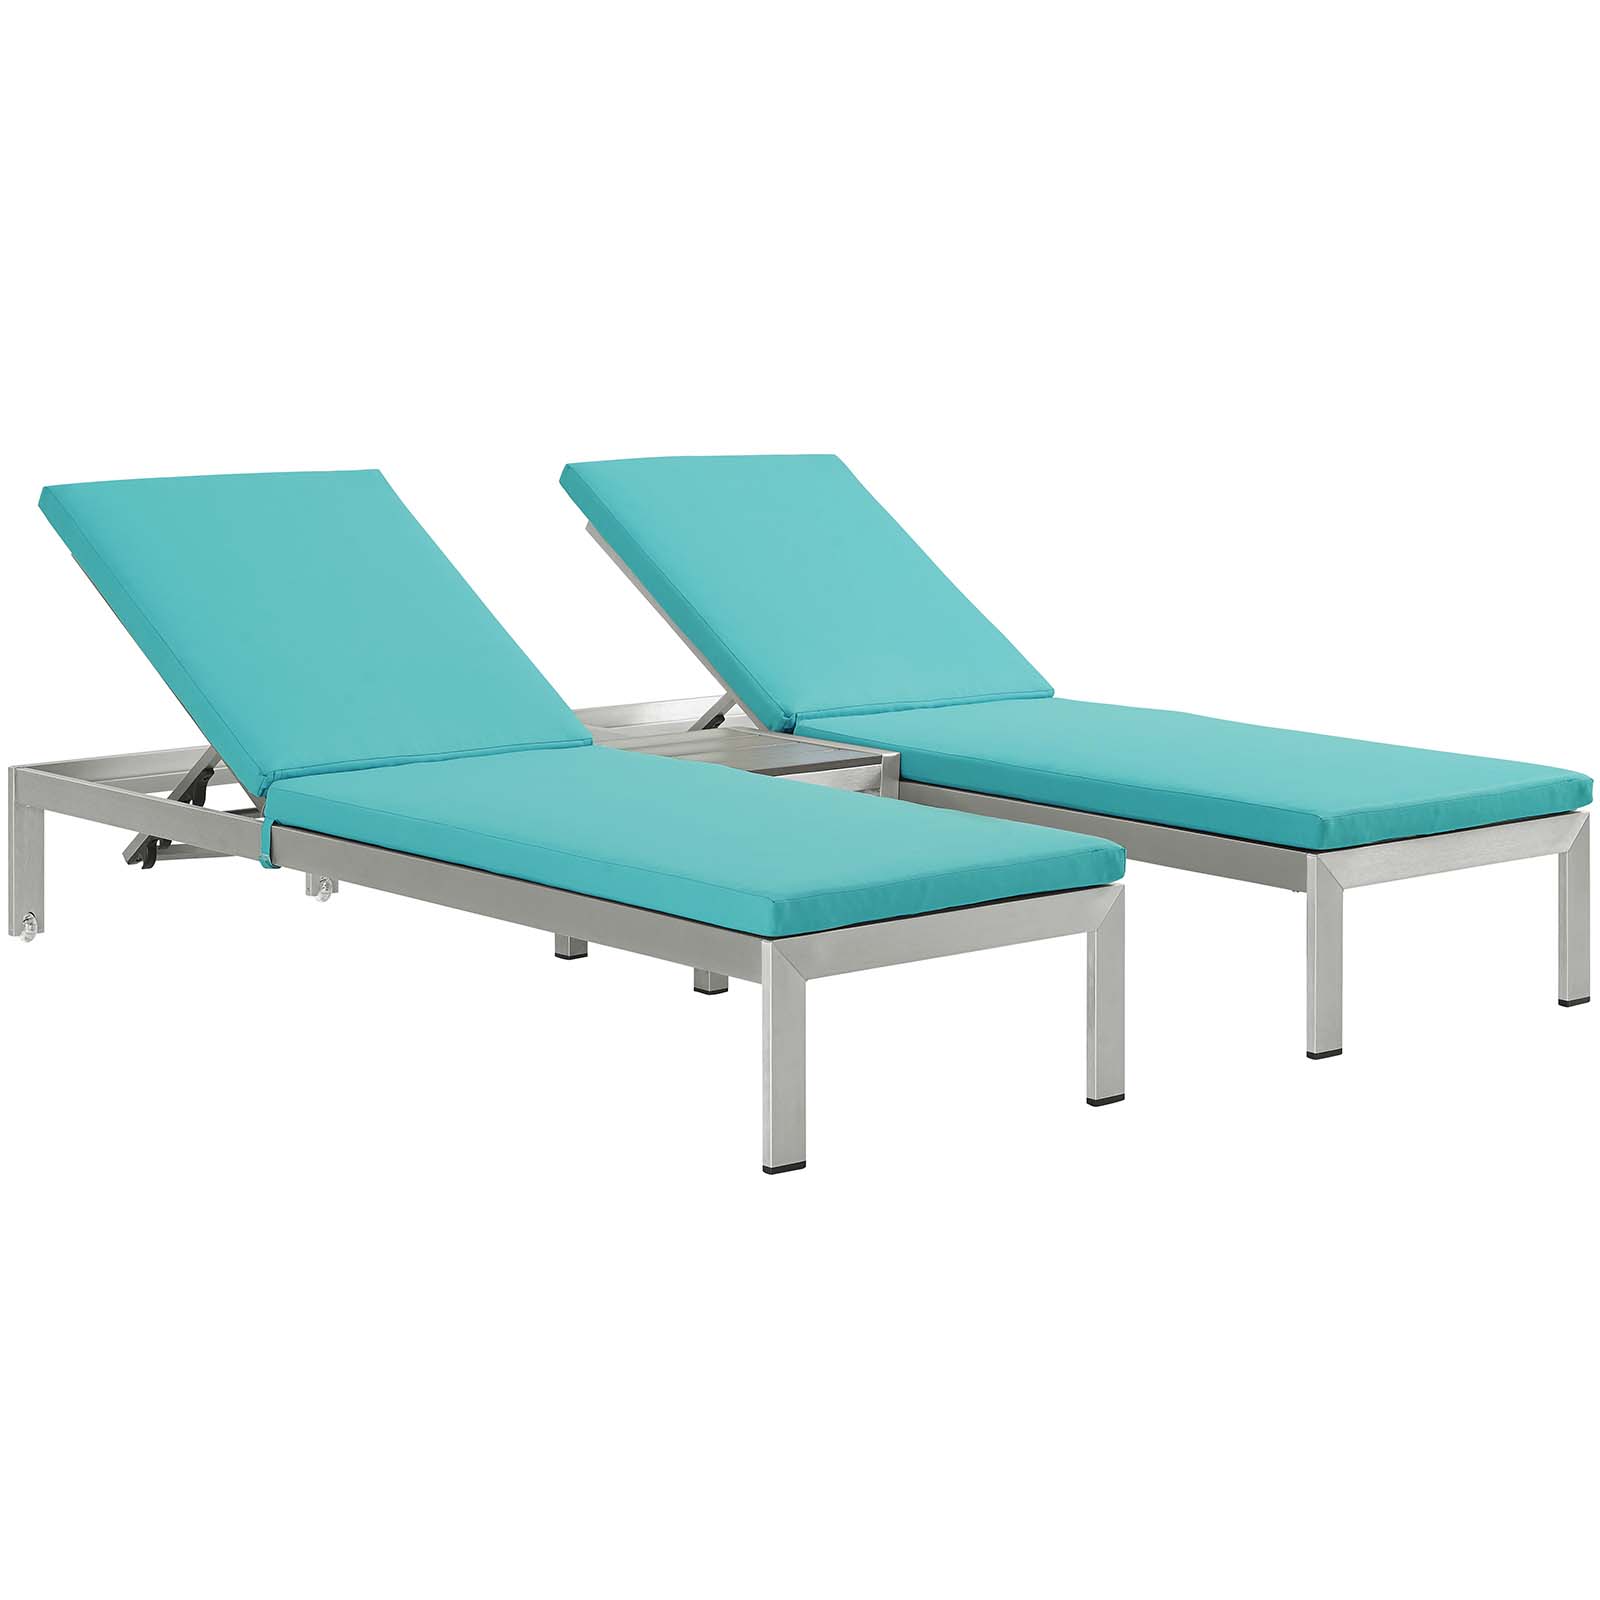 Modern Contemporary Urban Design Outdoor Patio Balcony Three PCS Chaise Lounge Chair, Blue, Aluminum - image 1 of 8